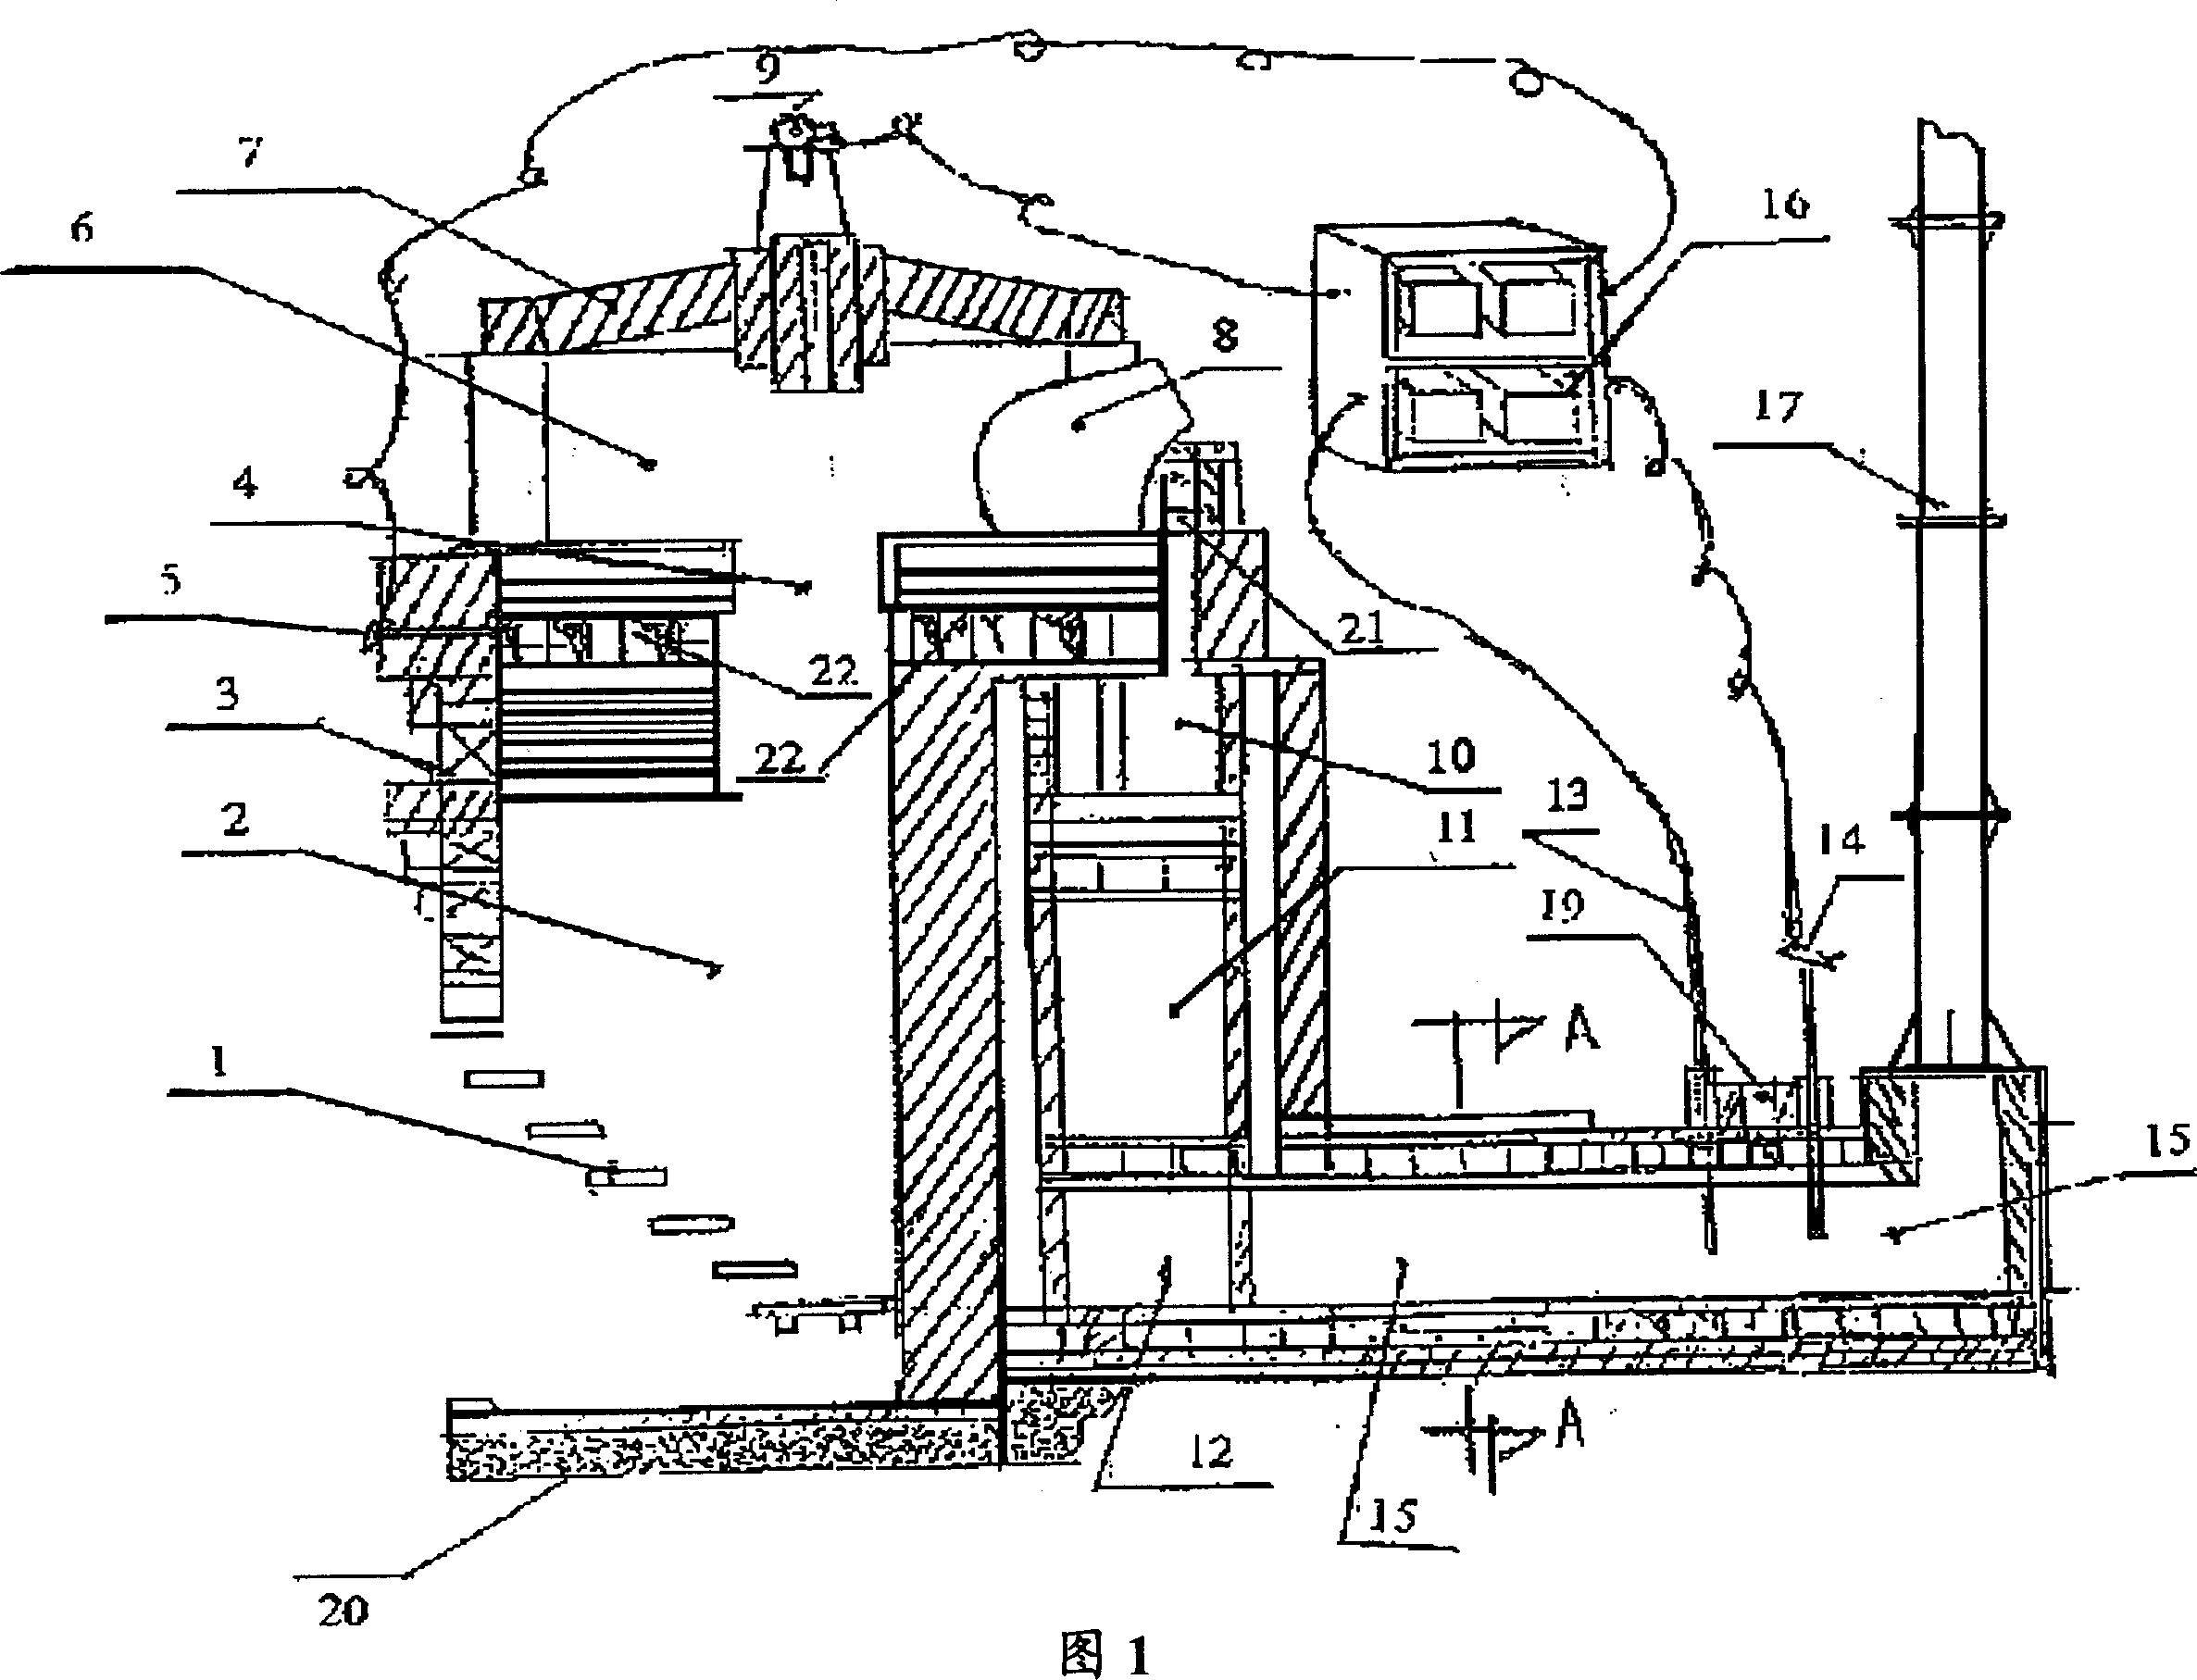 Glass melting crucible furnace with dual flow directions